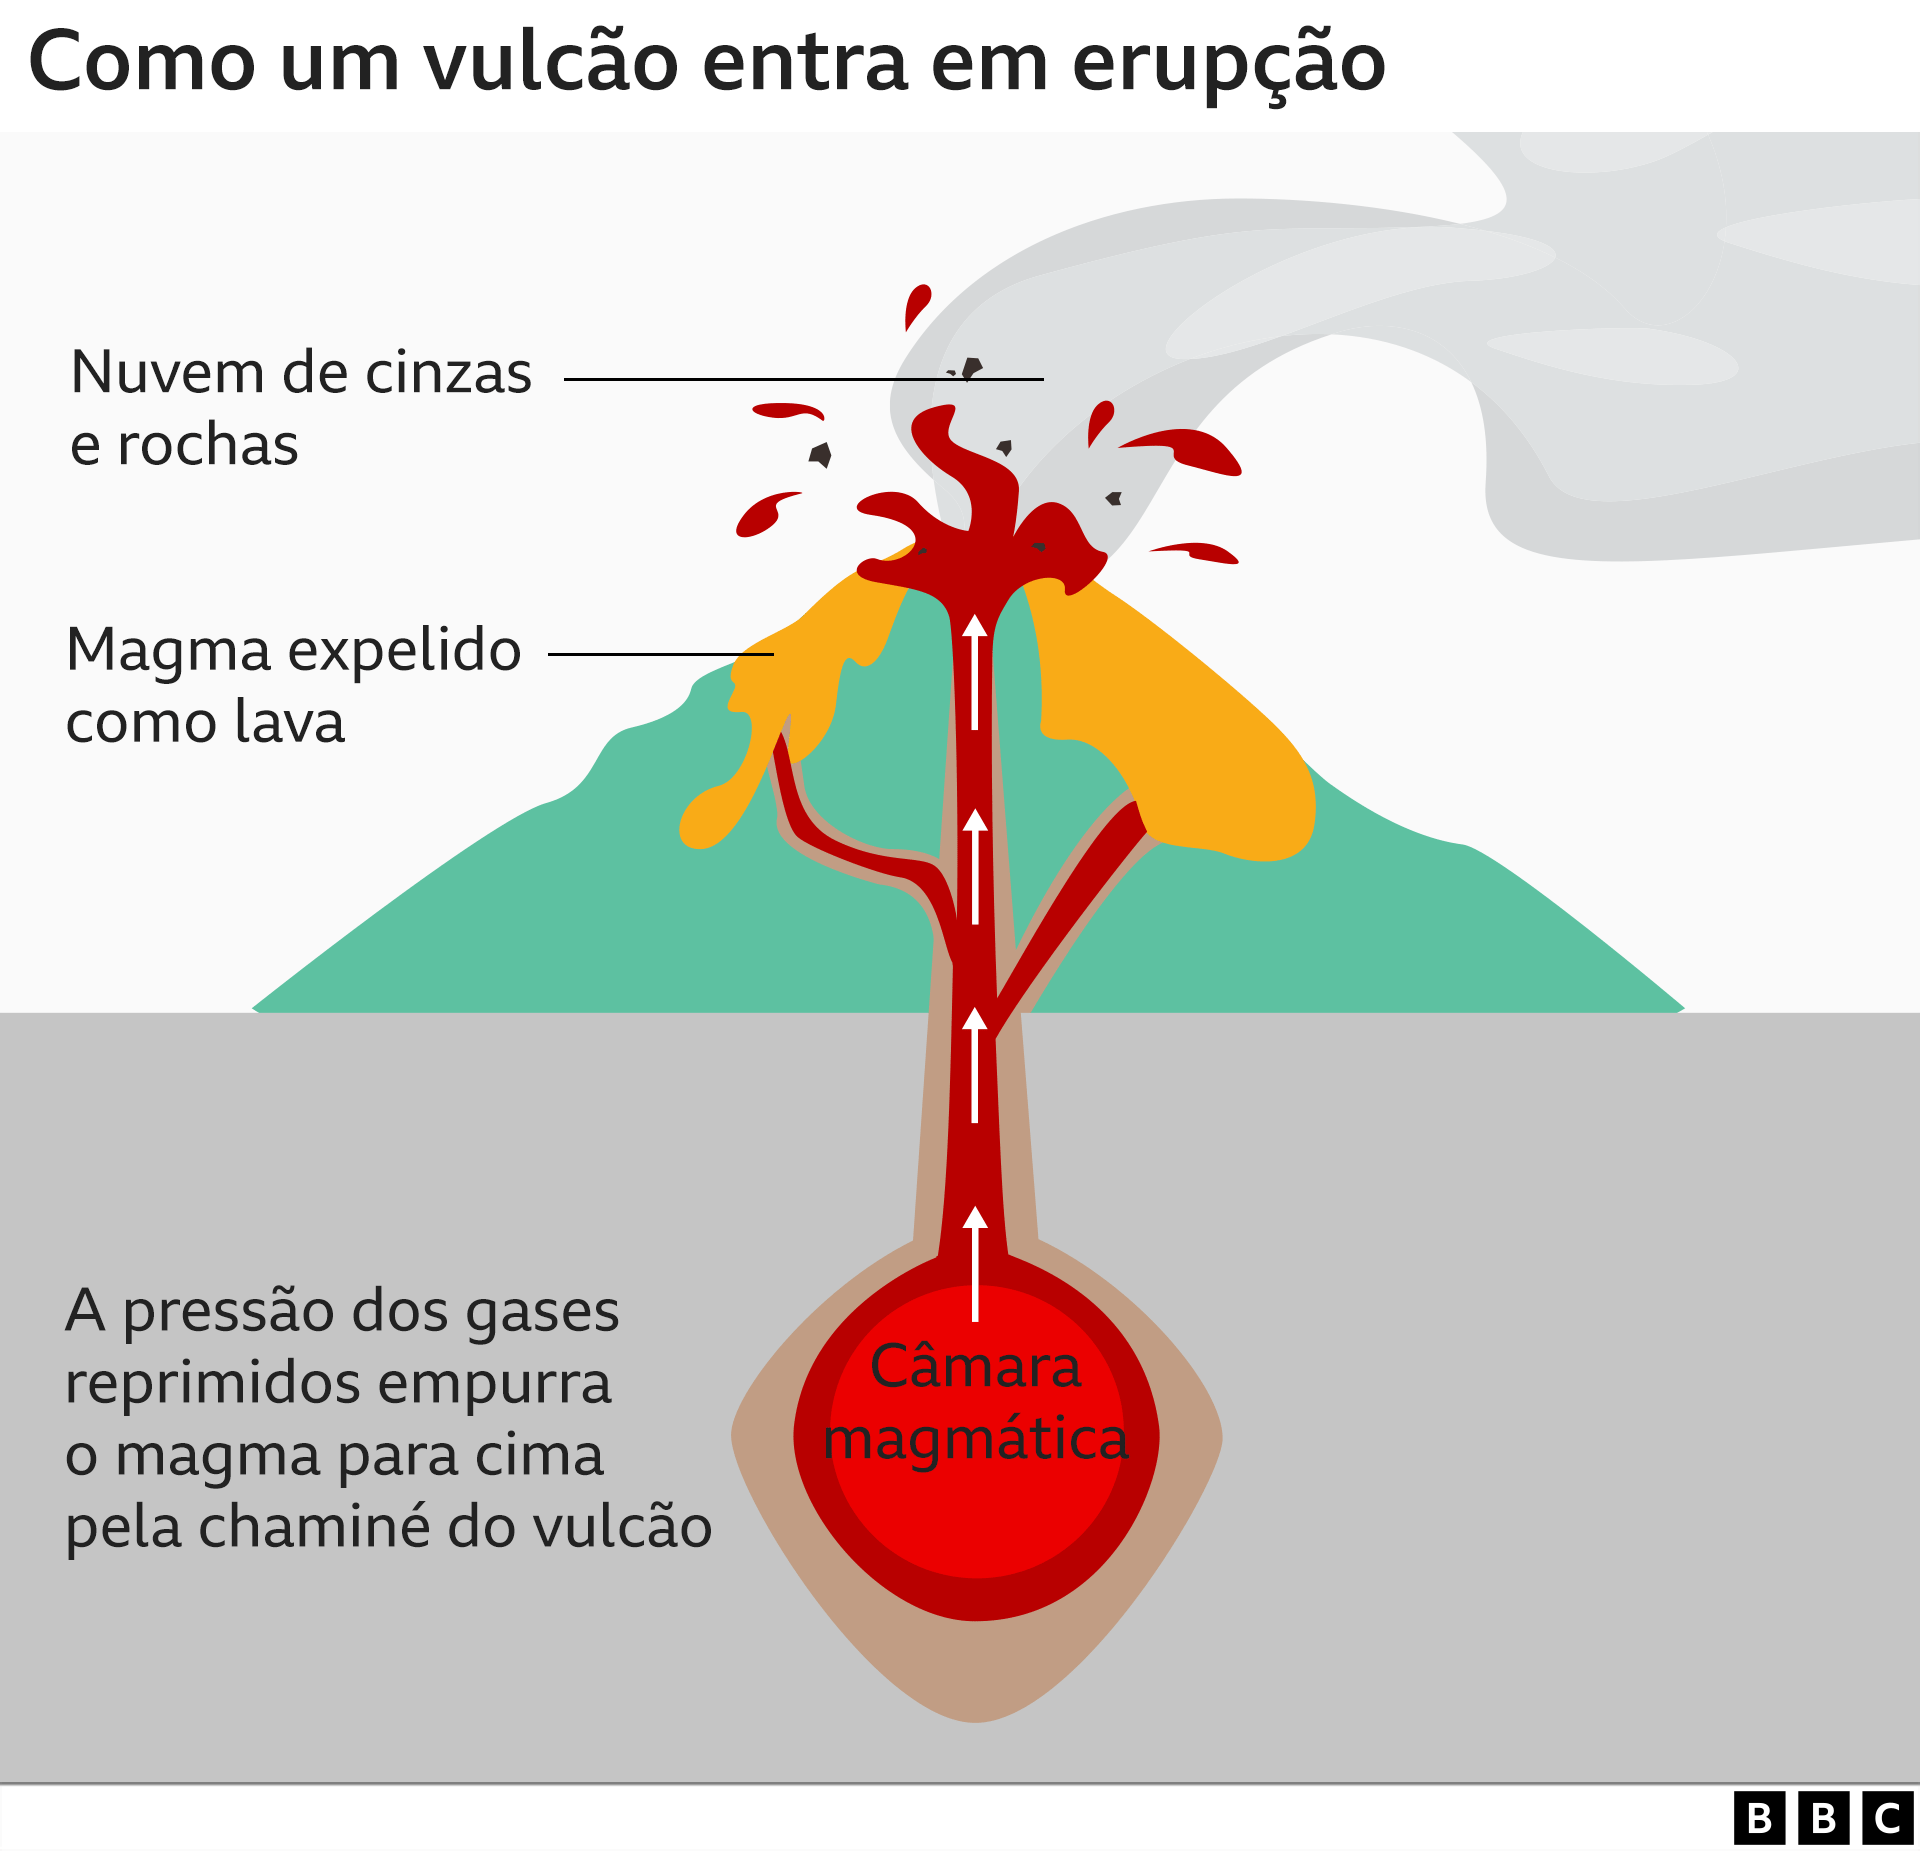 Infographic shows a volcano erupting